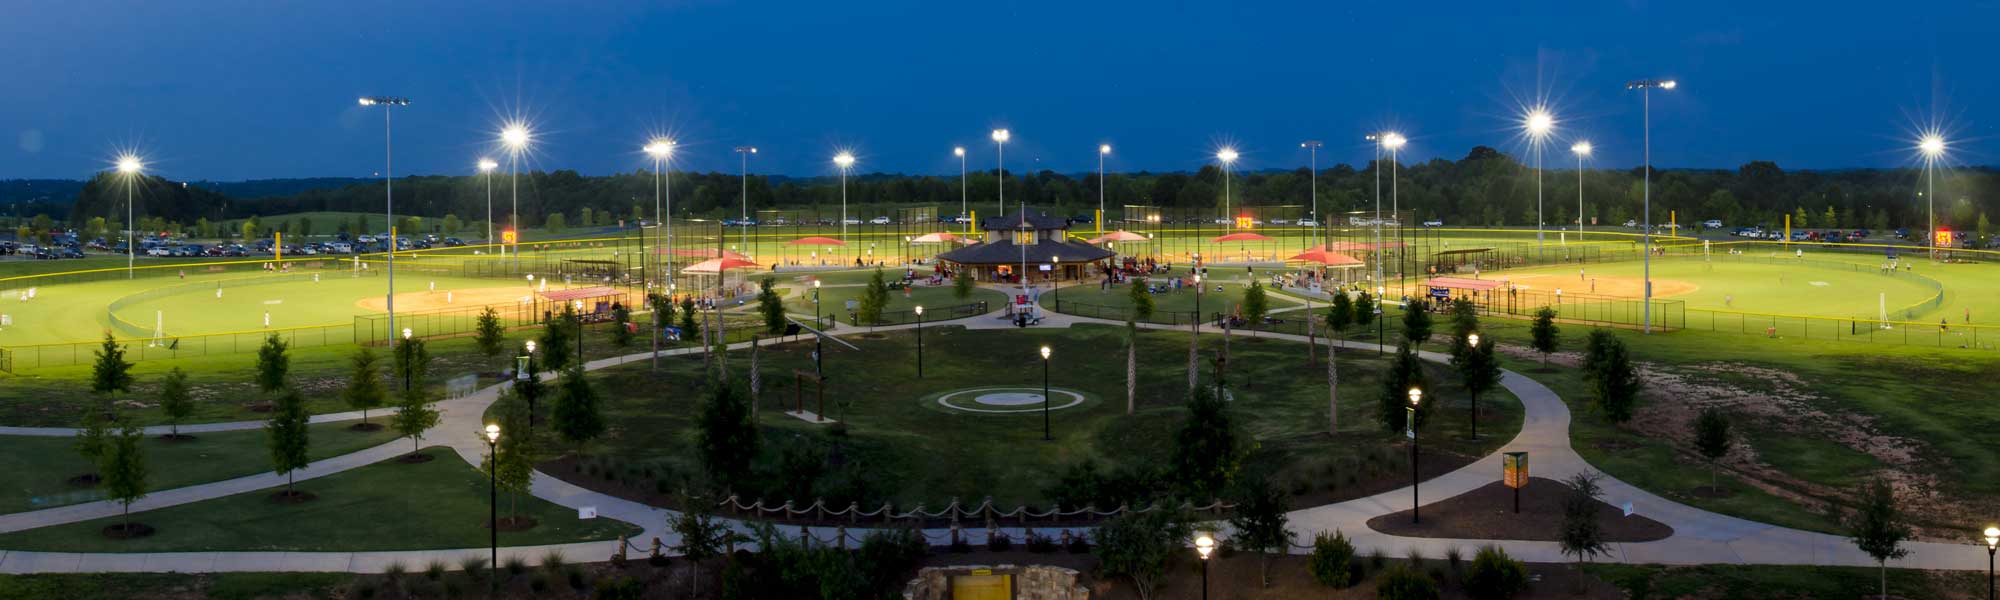 Tyger River Park Celebrates Five Years of Hitting it Out of the Park